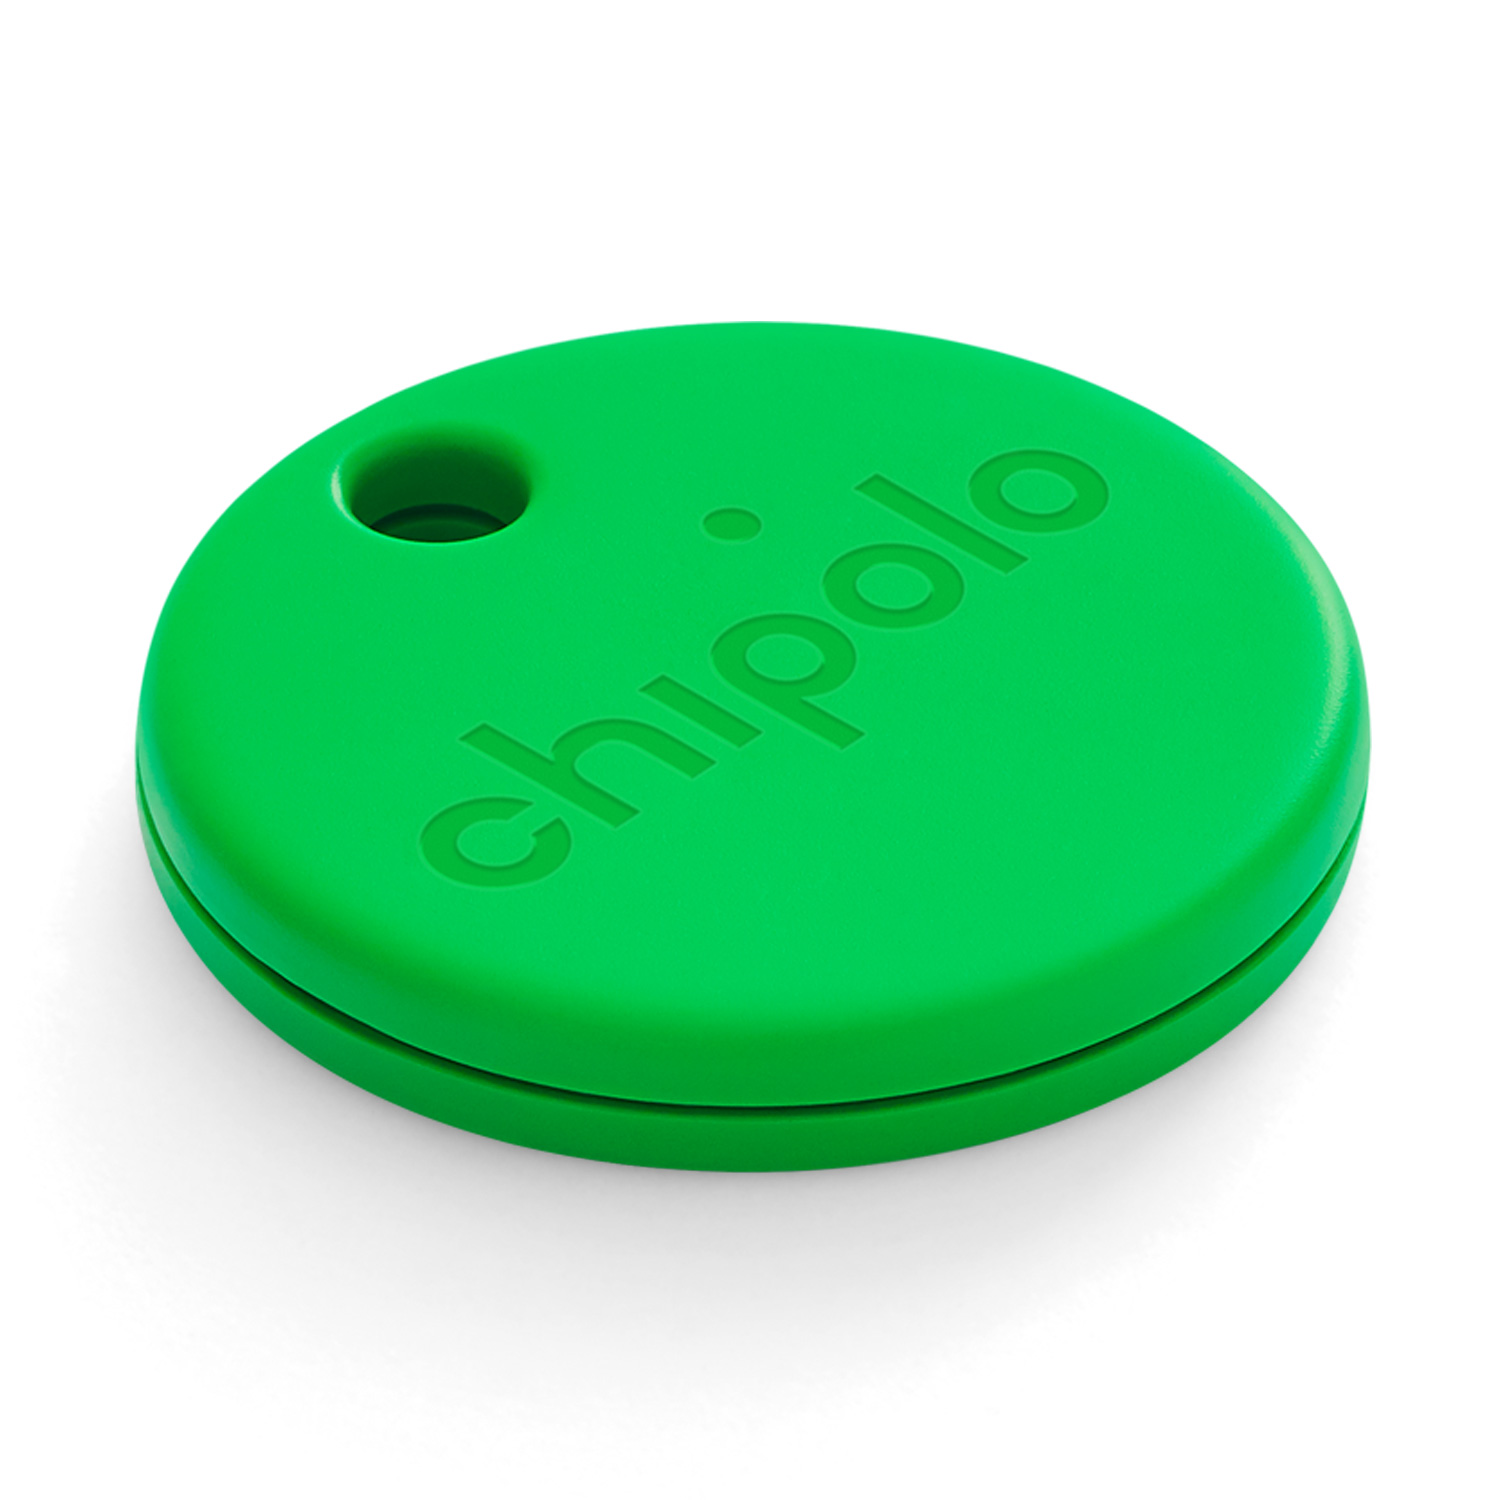 Chipolo ONE - Bluetooth tracker - green